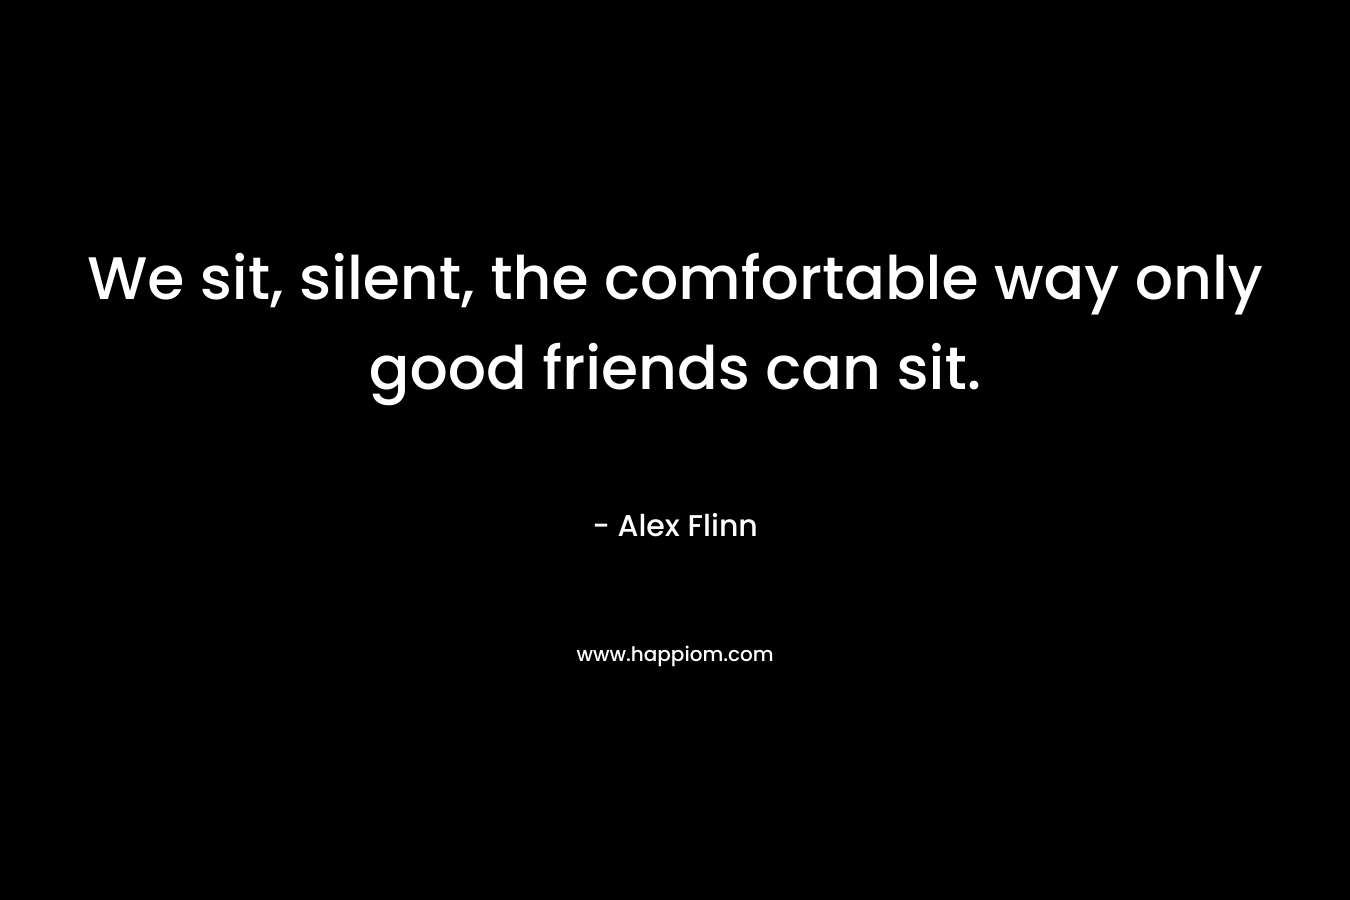 We sit, silent, the comfortable way only good friends can sit.